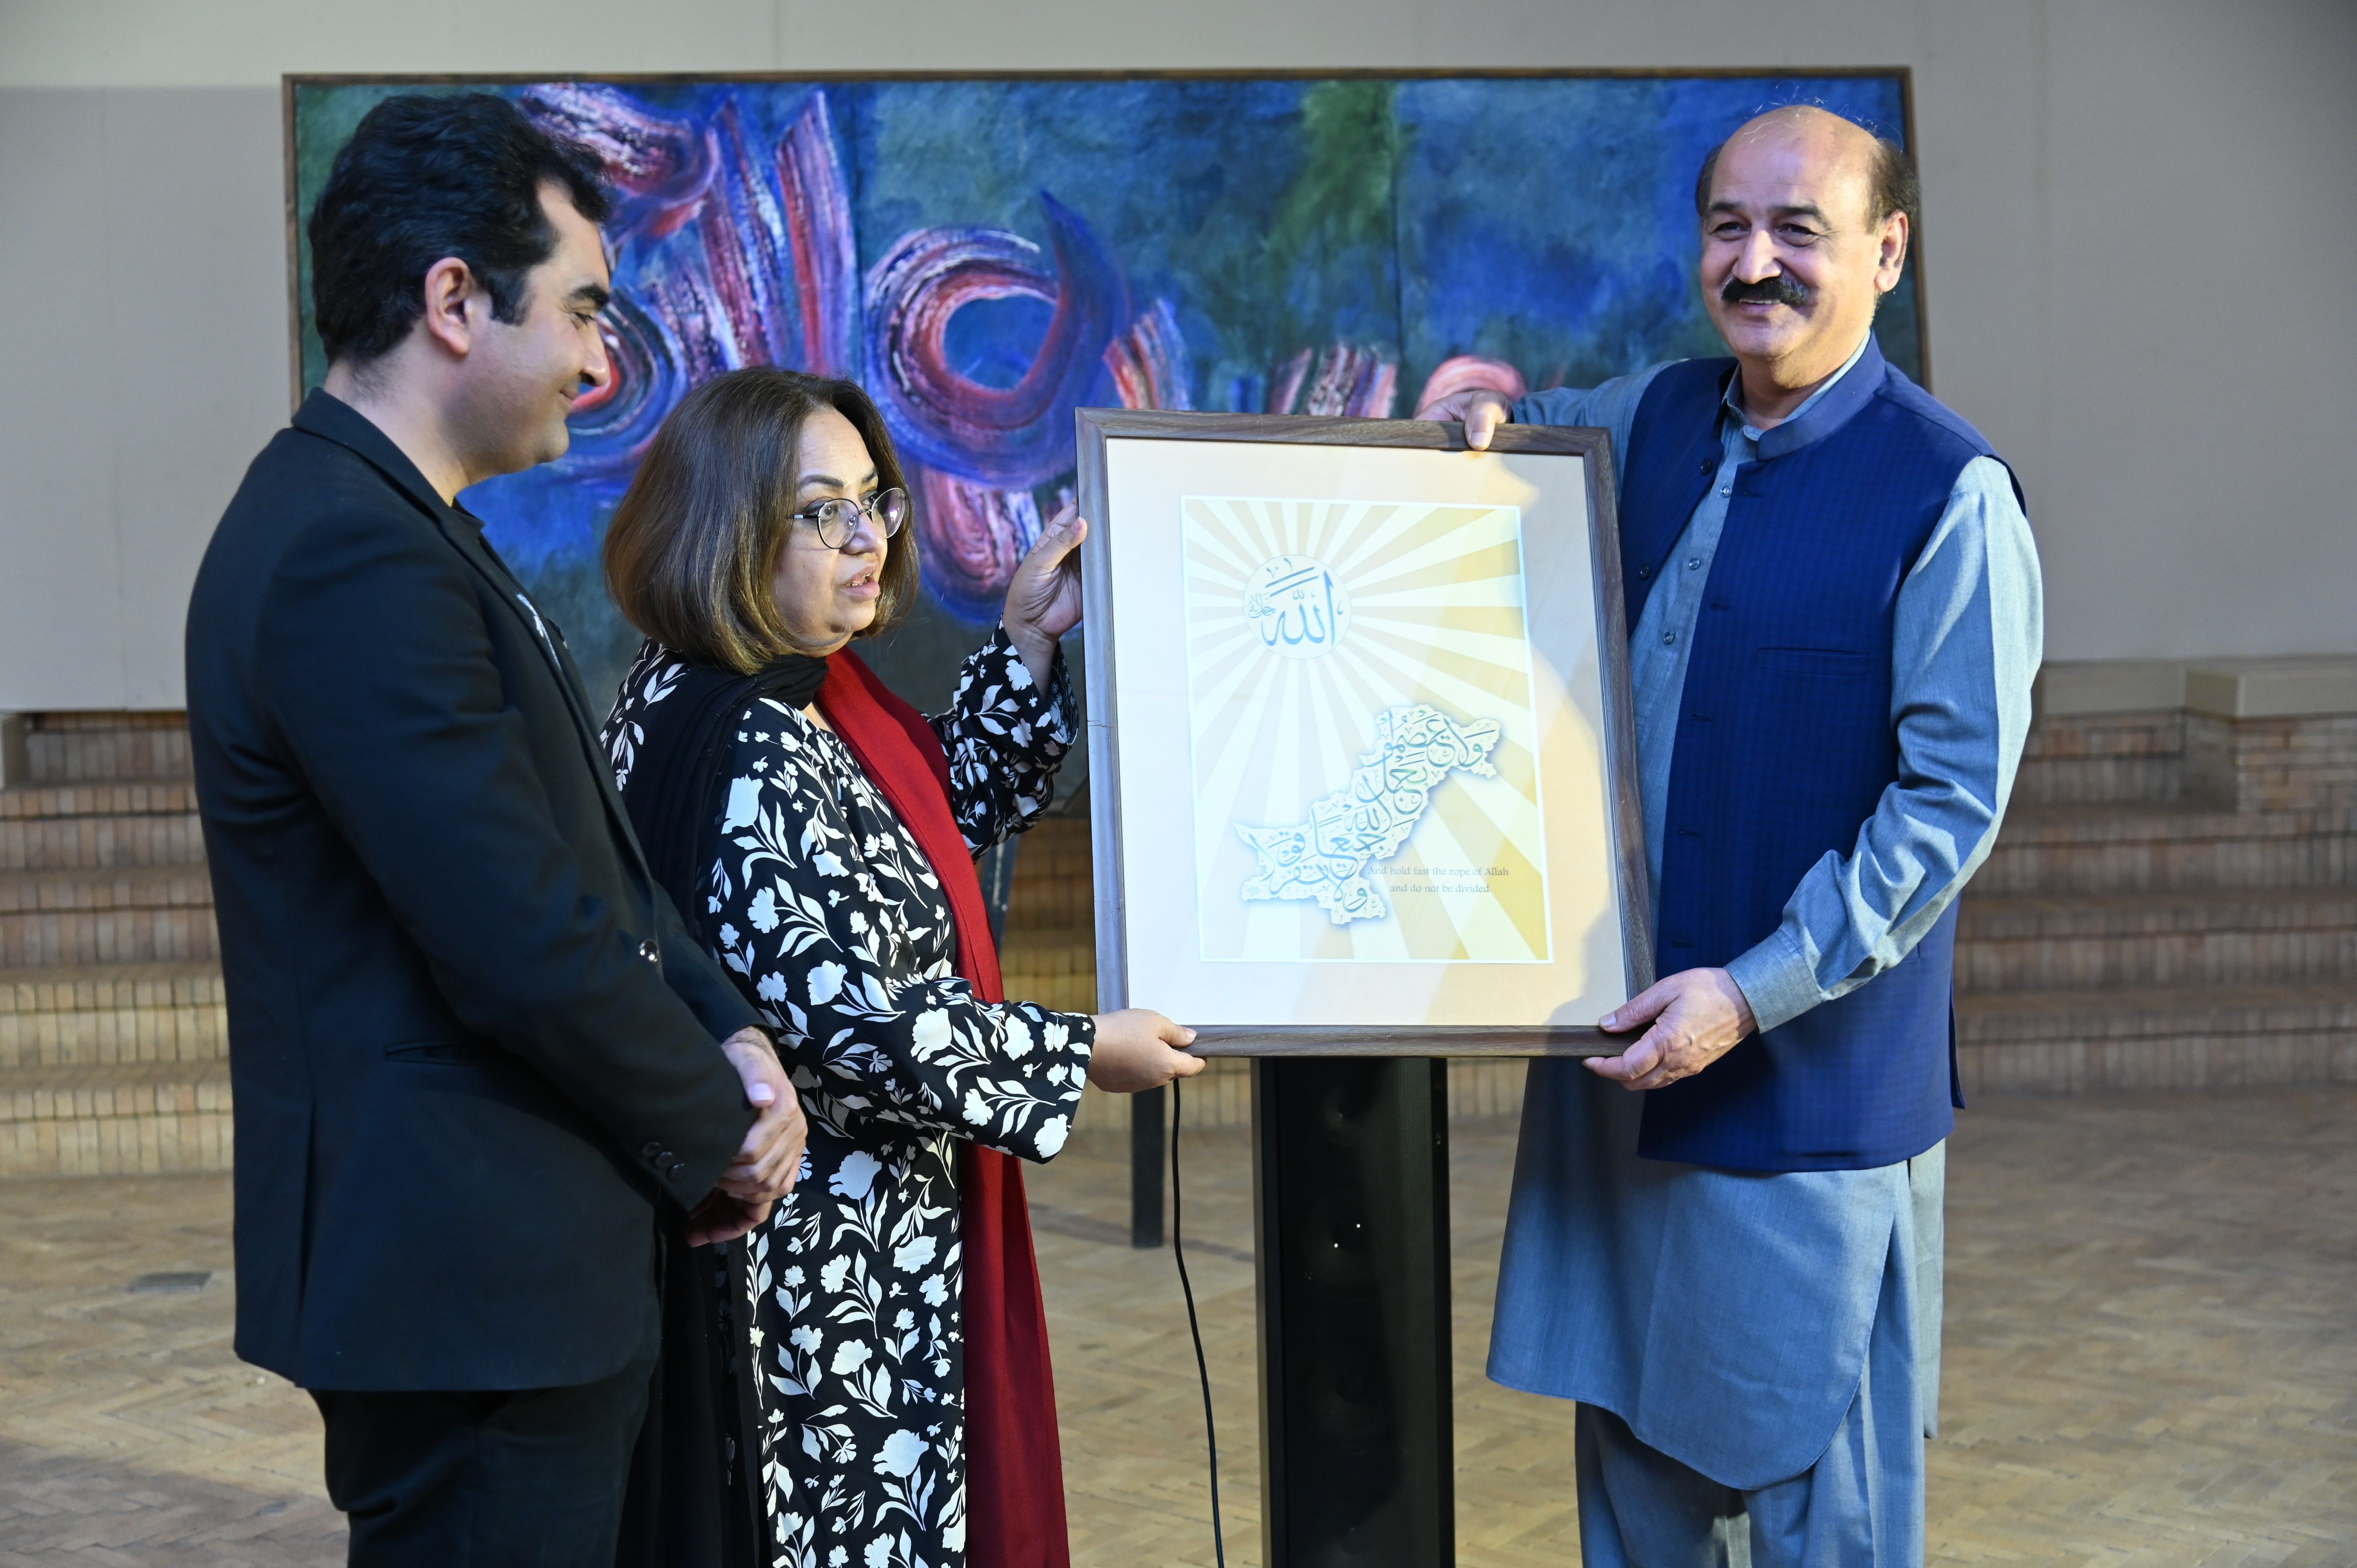 The Arabic calligraphy frame being presented to the guest of the event